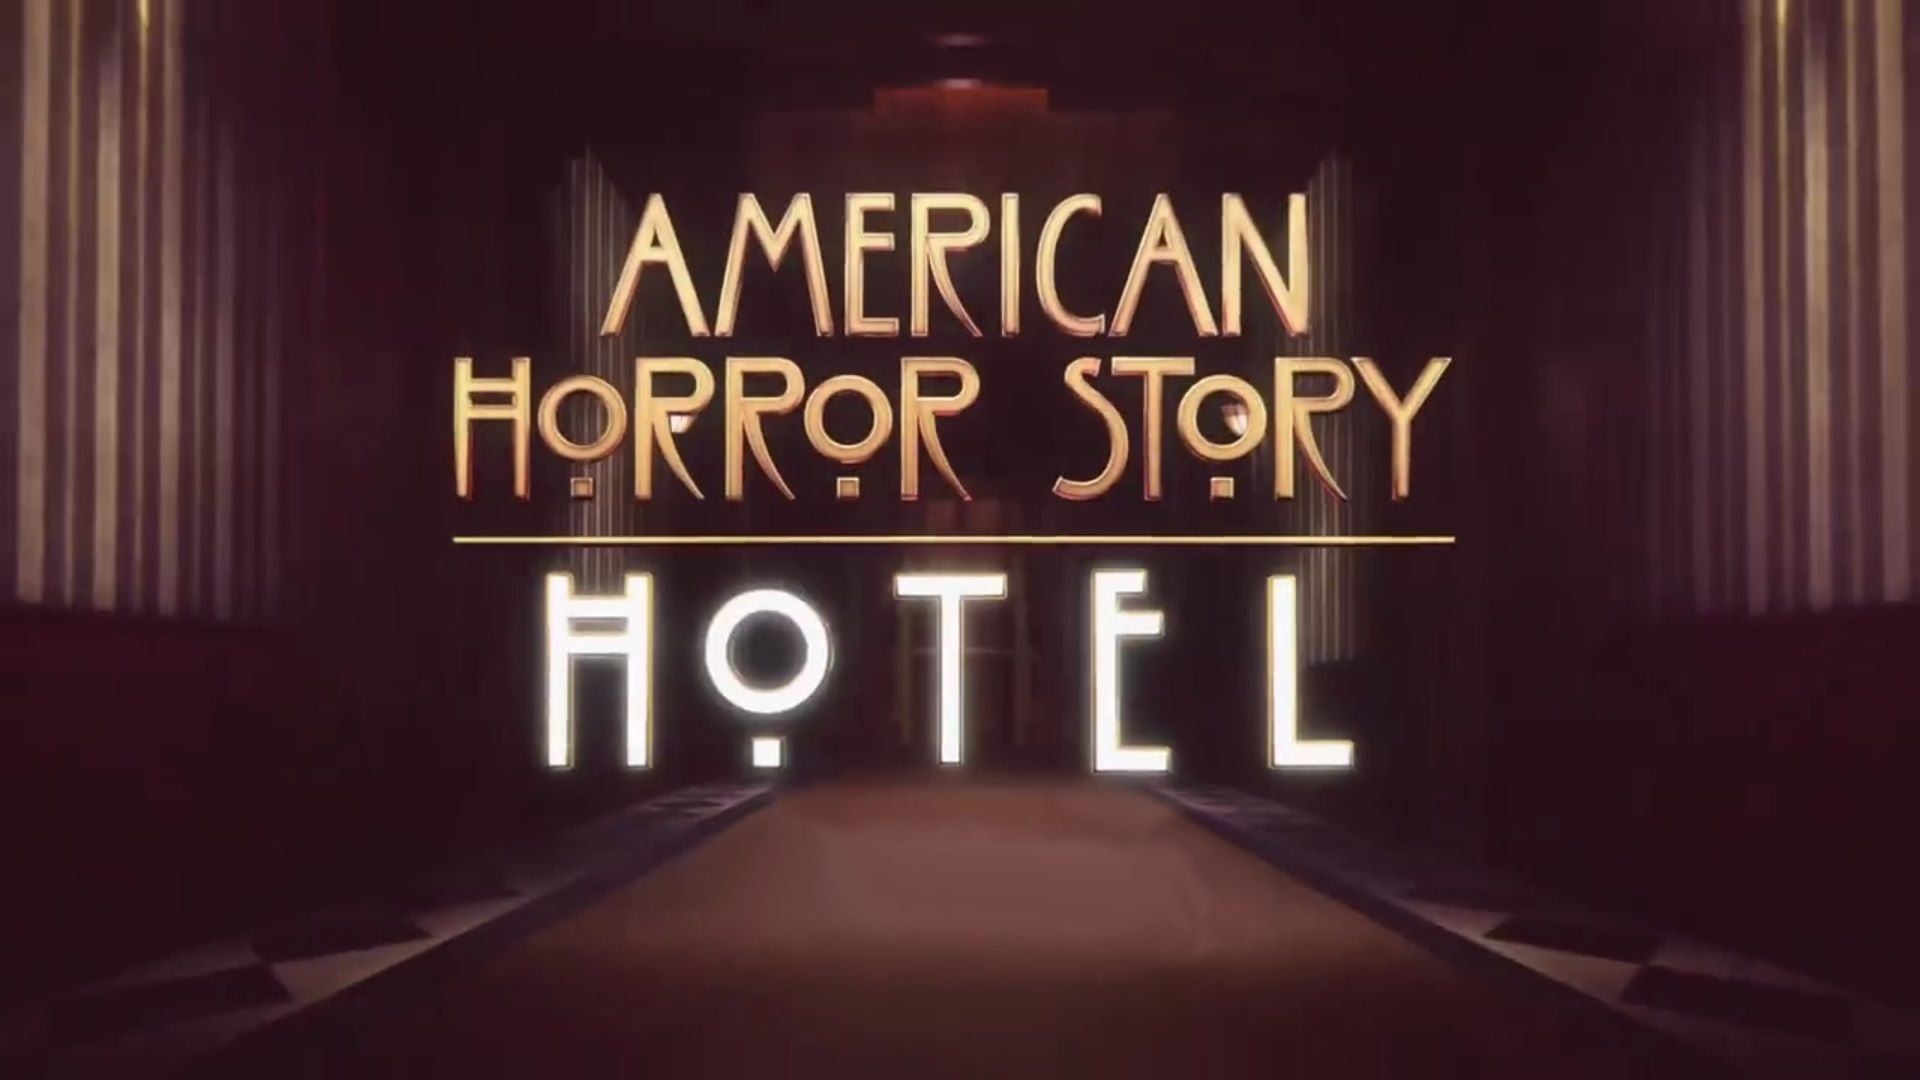 Free download American Horror Story Hotel Wallpaper High Resolution and Quality [1920x1080] for your Desktop, Mobile & Tablet. Explore American Horror Story Hotel Wallpaper. American Horror Story Wallpaper, American